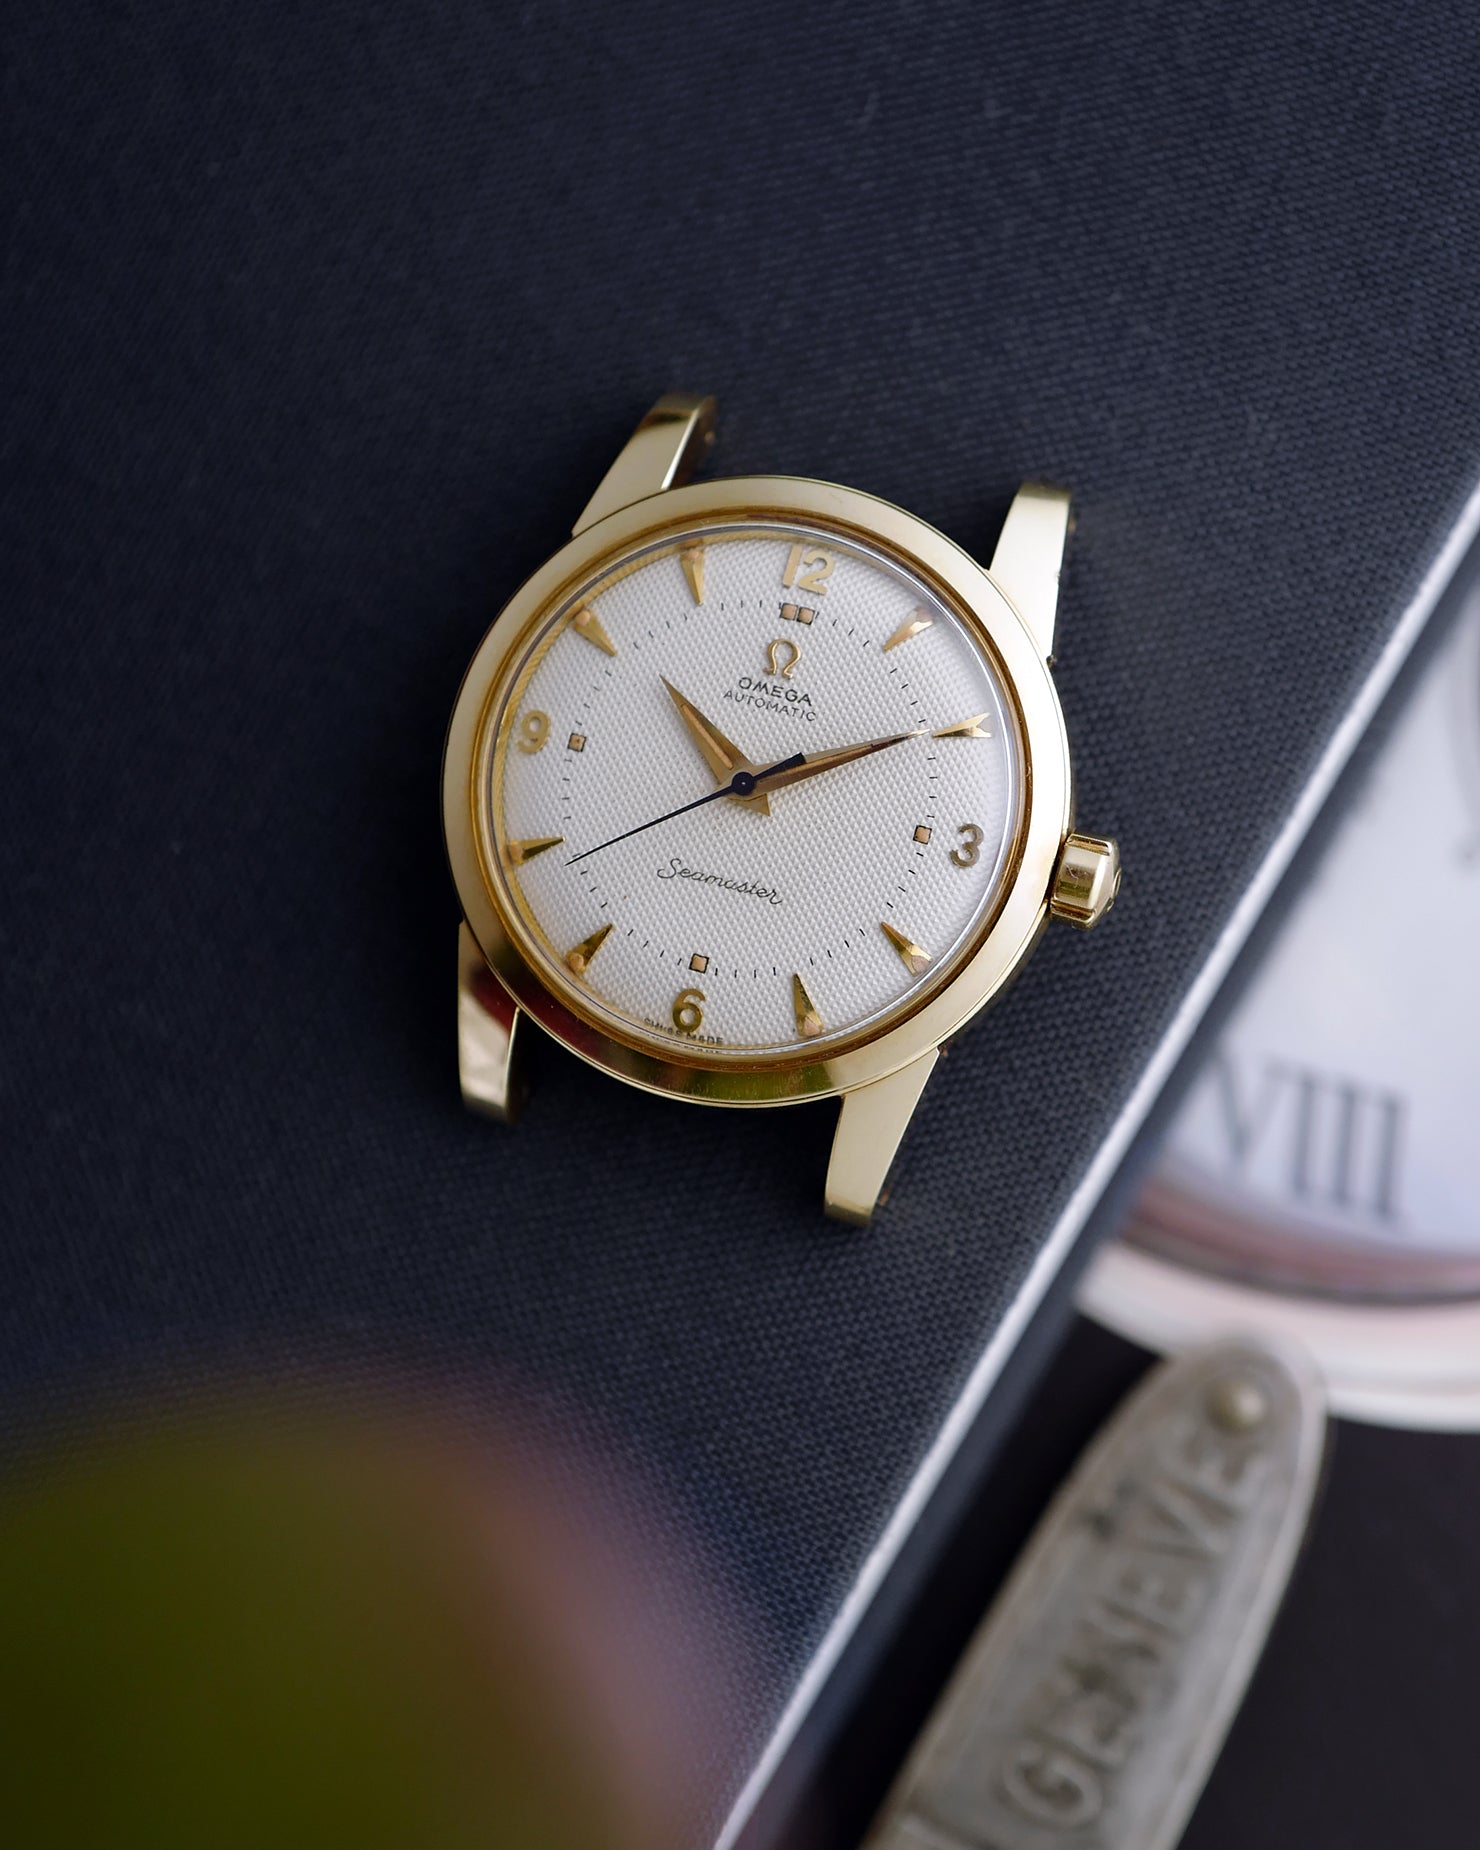 *NOS* 1951 Omega Seamaster | 'Honeycomb Dial' | Ref. 2577 SC | 'Beefy Lugs' | 14kt Yellow Gold | With Box and Tag